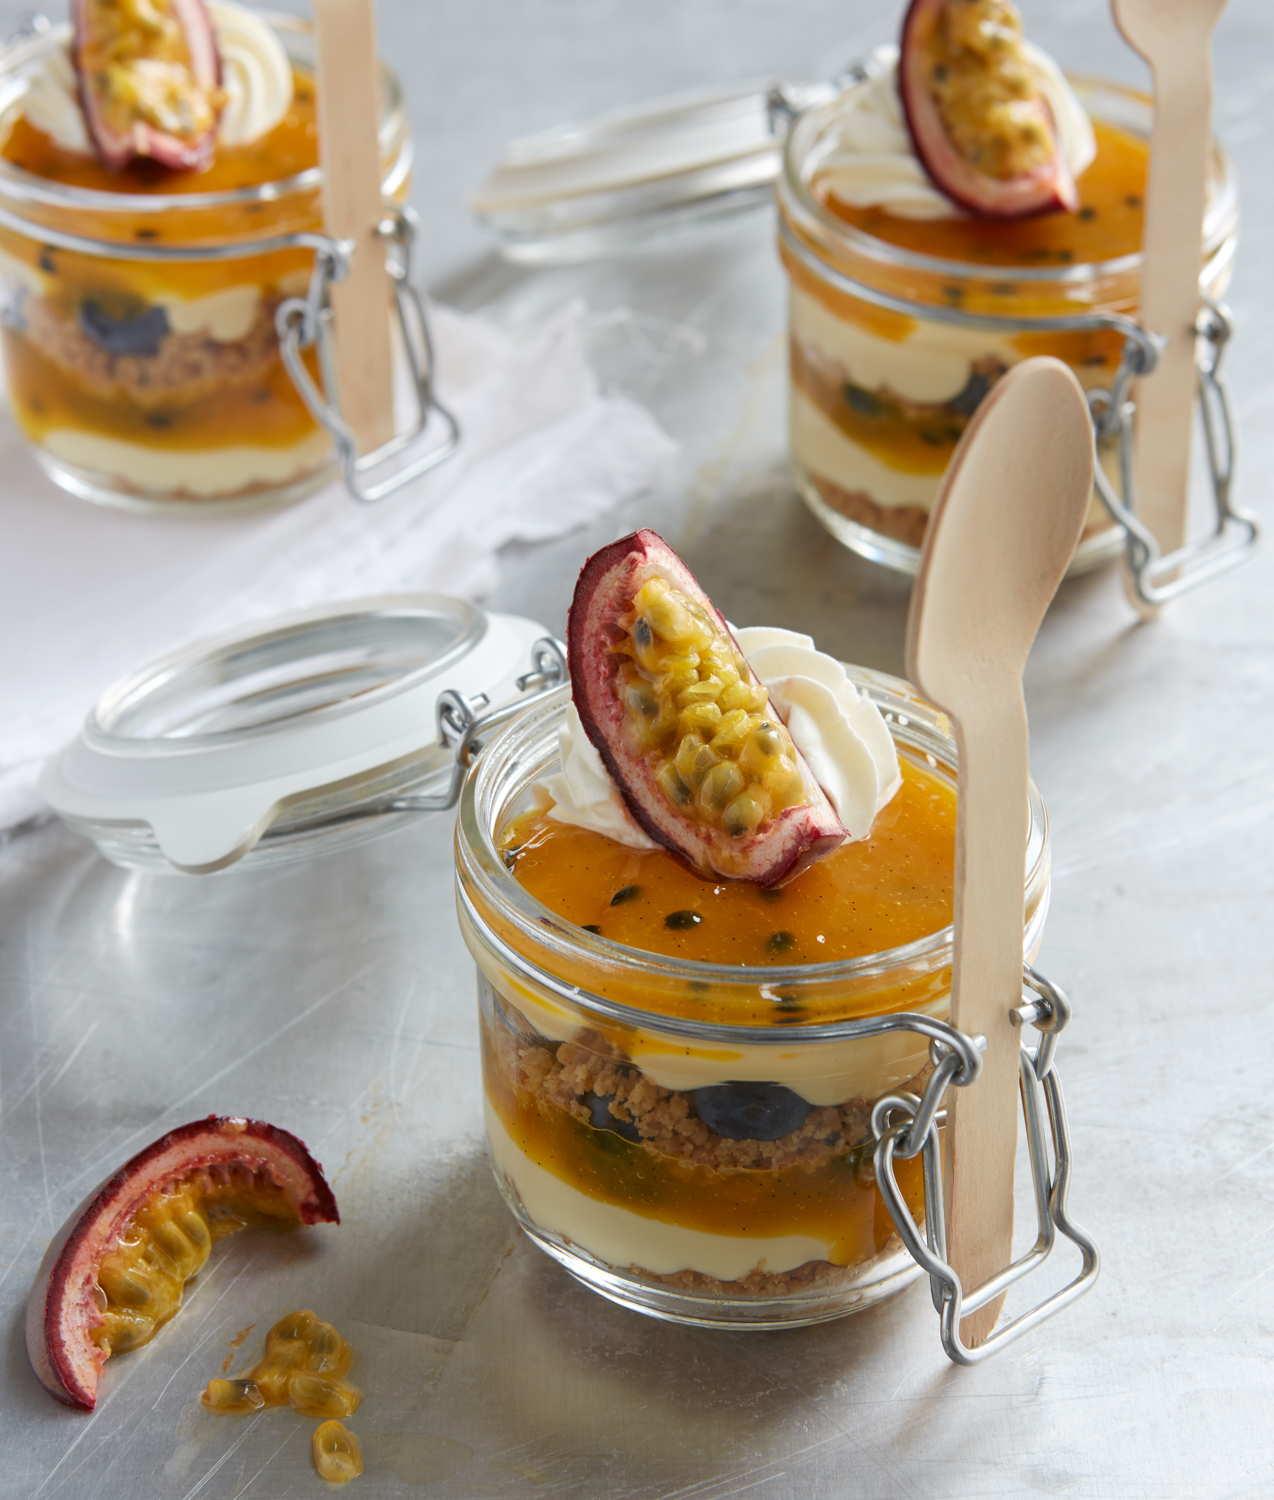 American Passionfruit Cheesecake by Beate Wöllstein